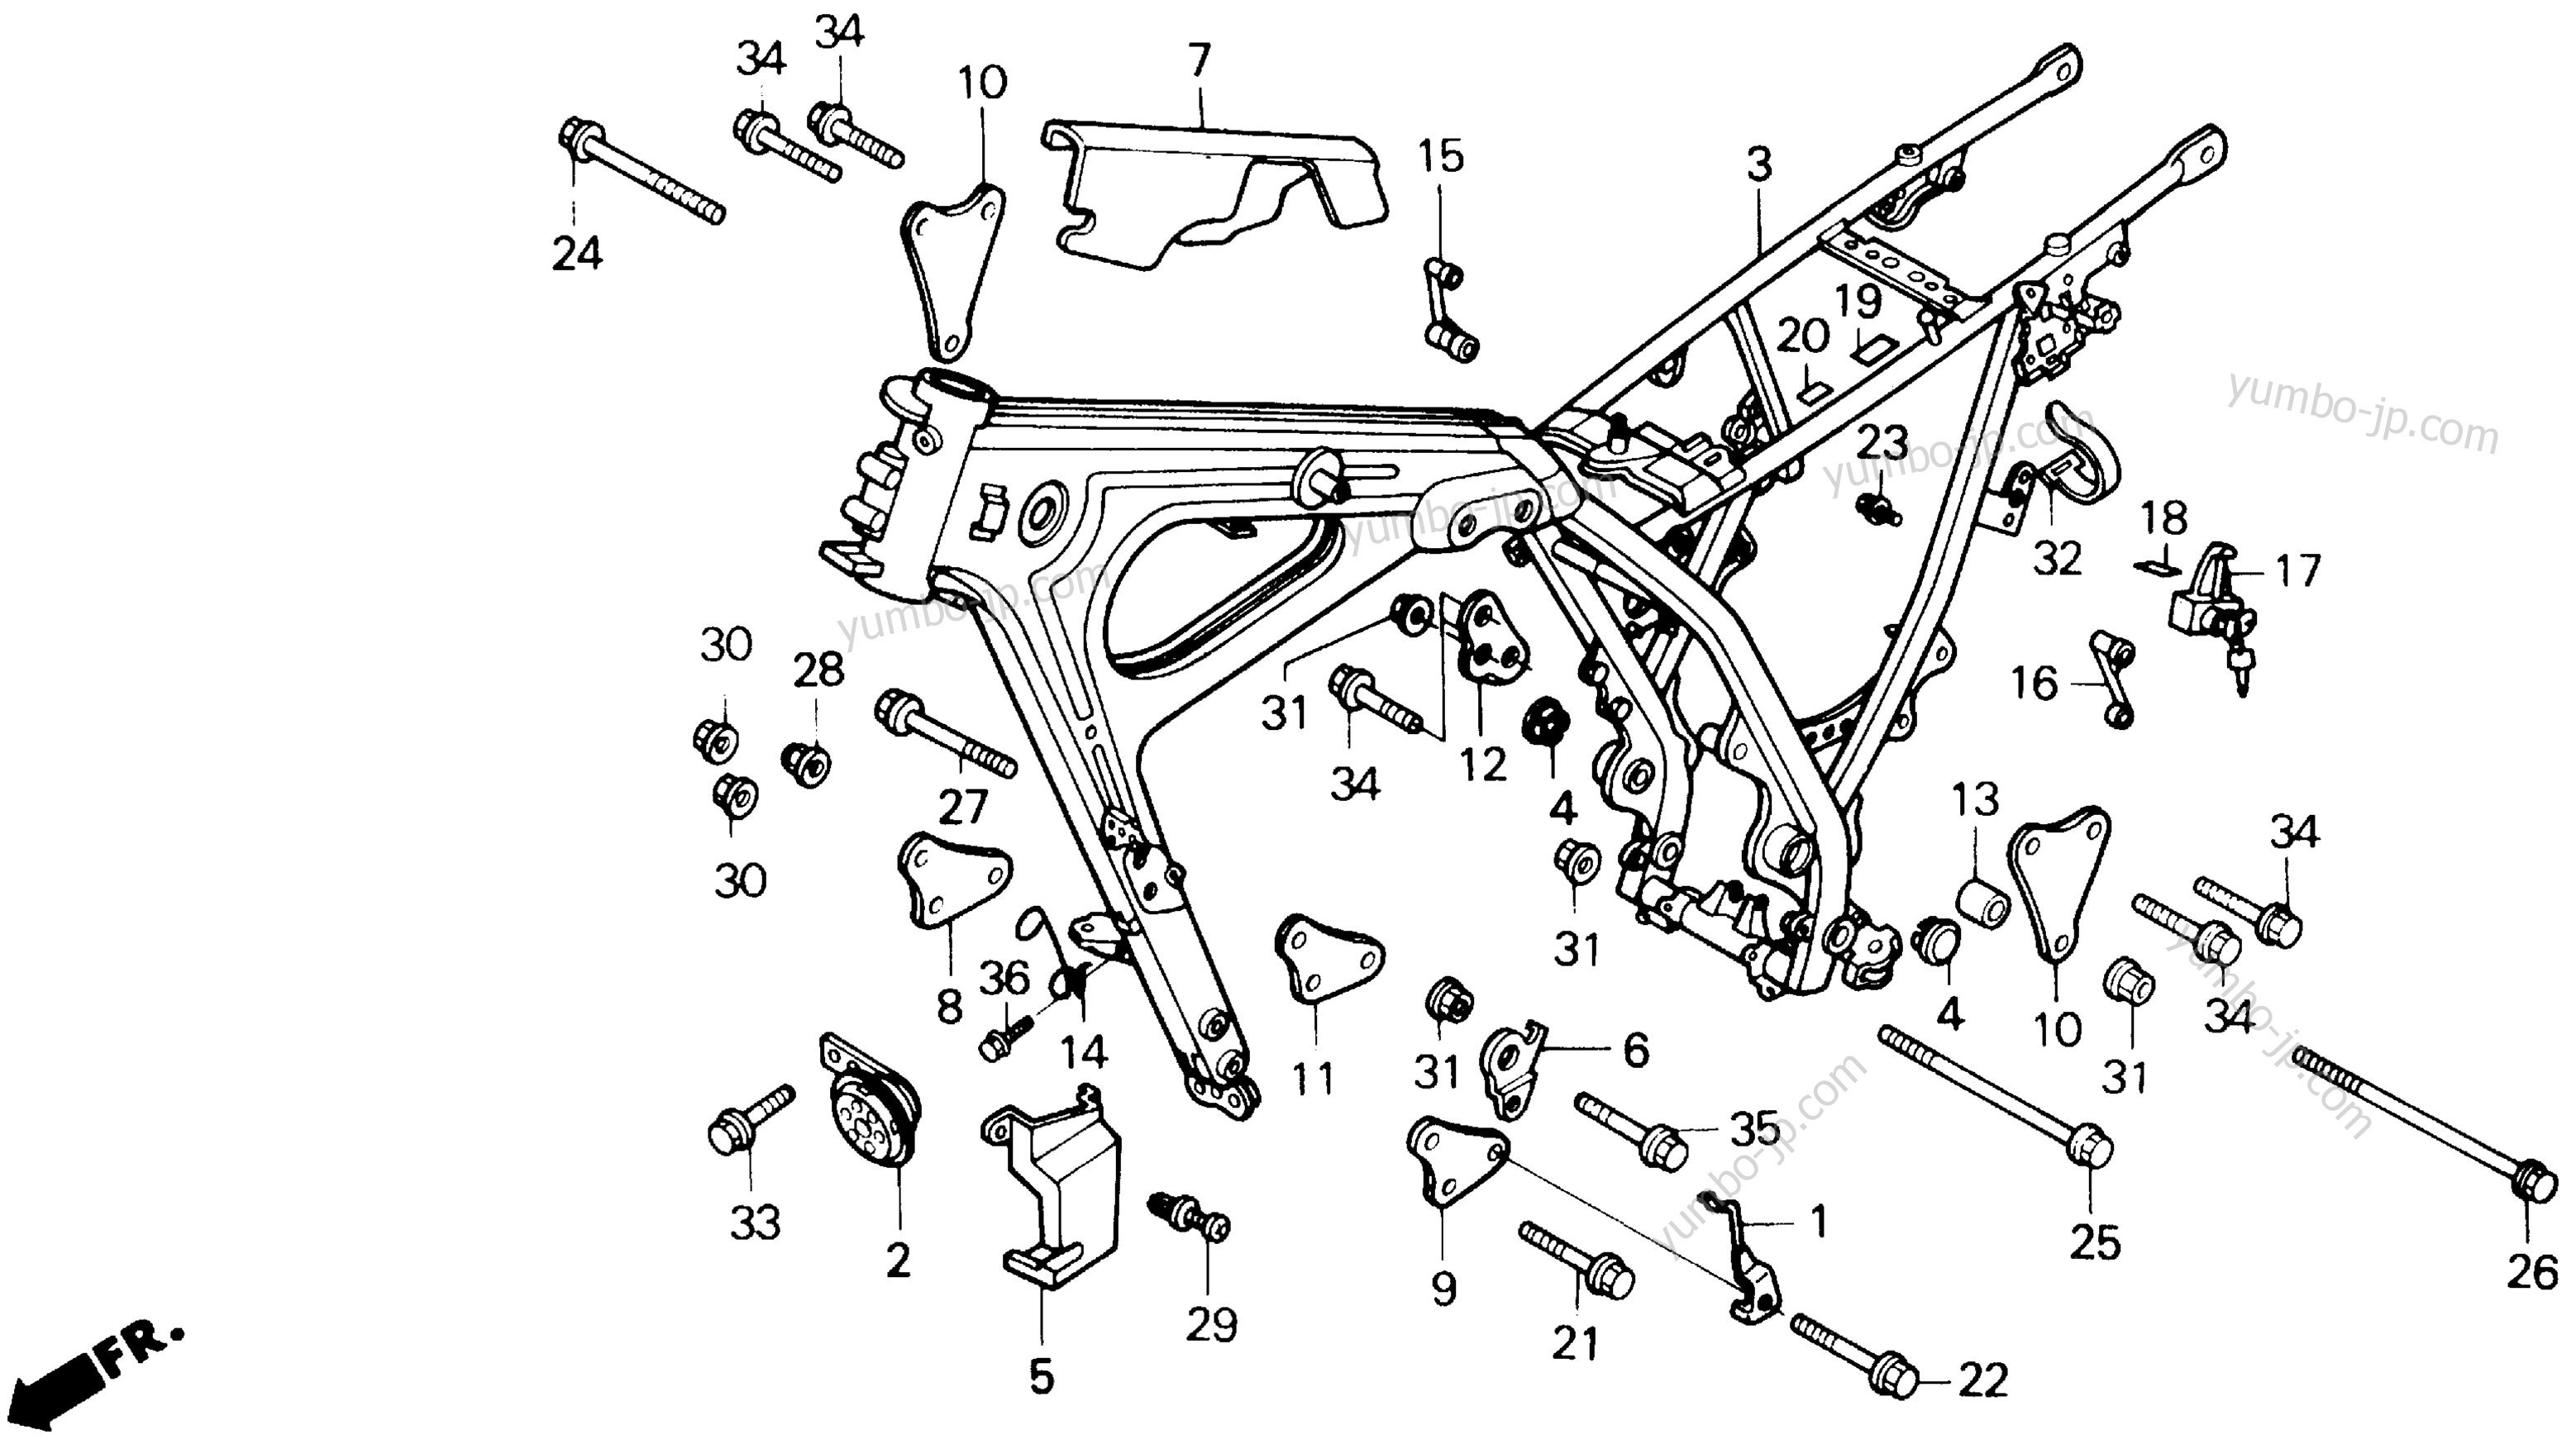 FRAME for motorcycles HONDA NX250 AC 1990 year